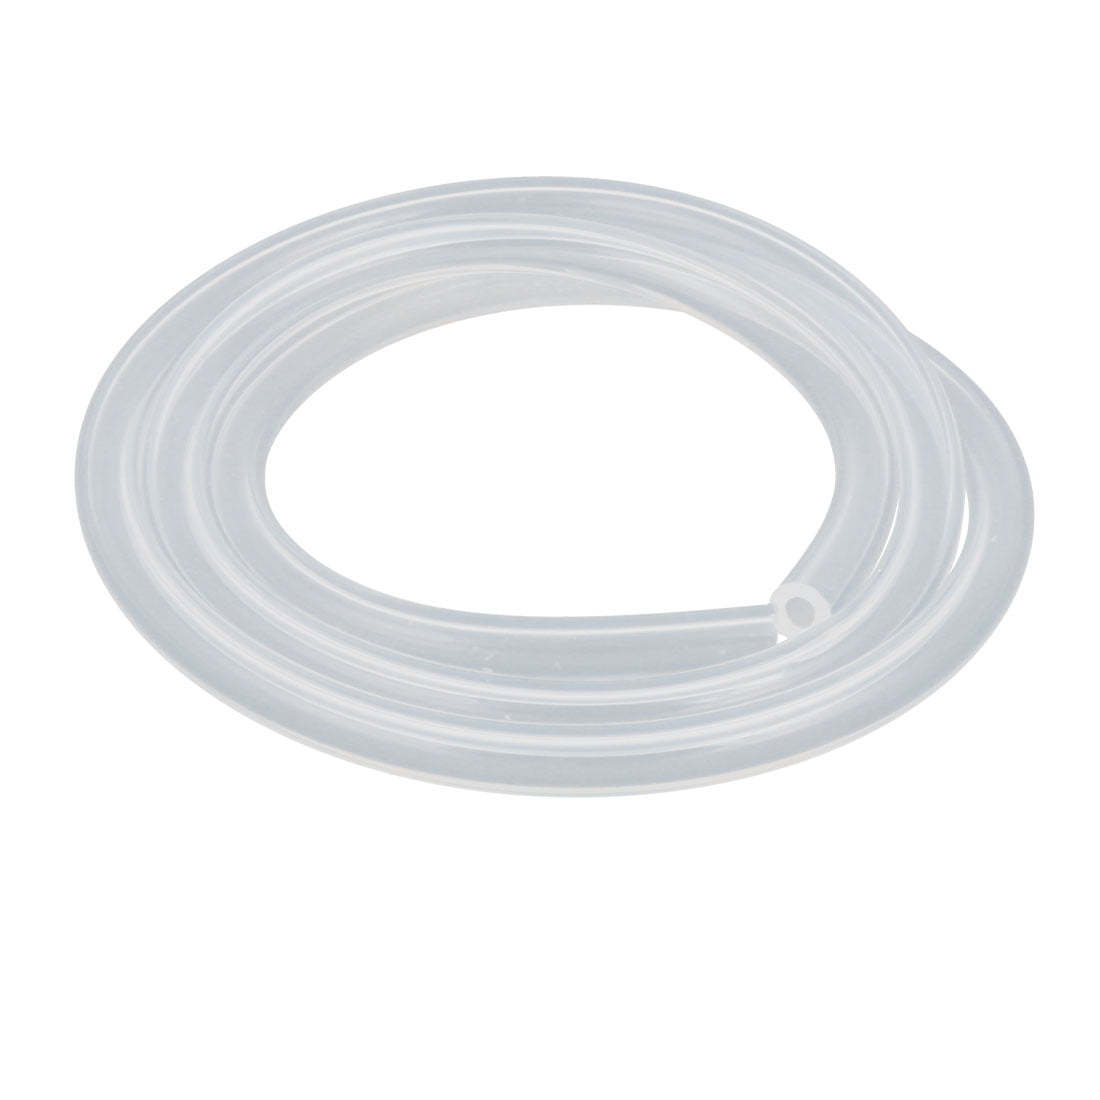 H● 1M Length 5mm x 10mm Transparent Silicone Rubber Tubing Hose Pipe. 